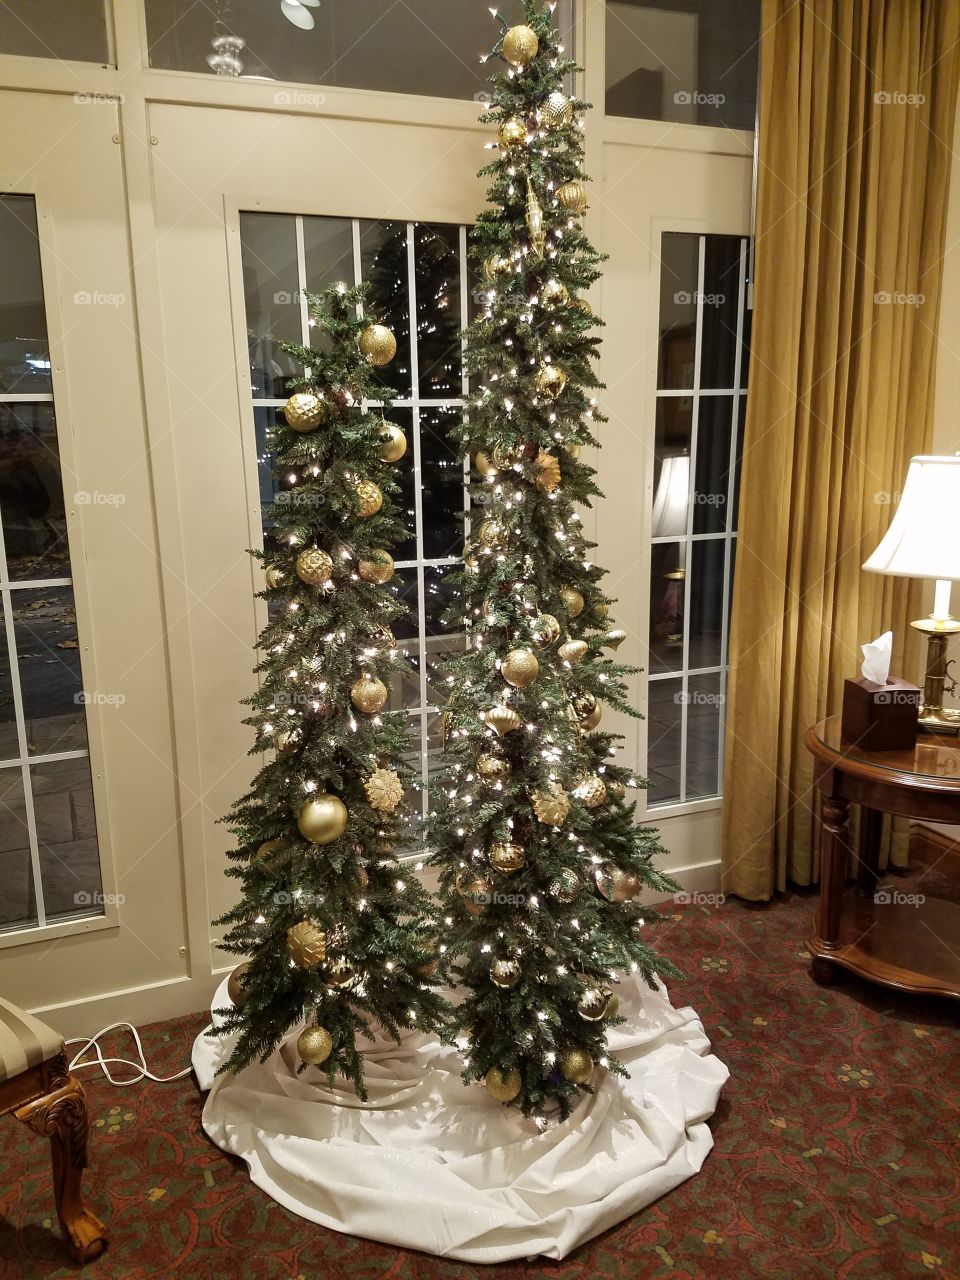 This past Christmas we wanted to do something different with our Christmas tree display. Instead of one, we had three! It was so beautiful!